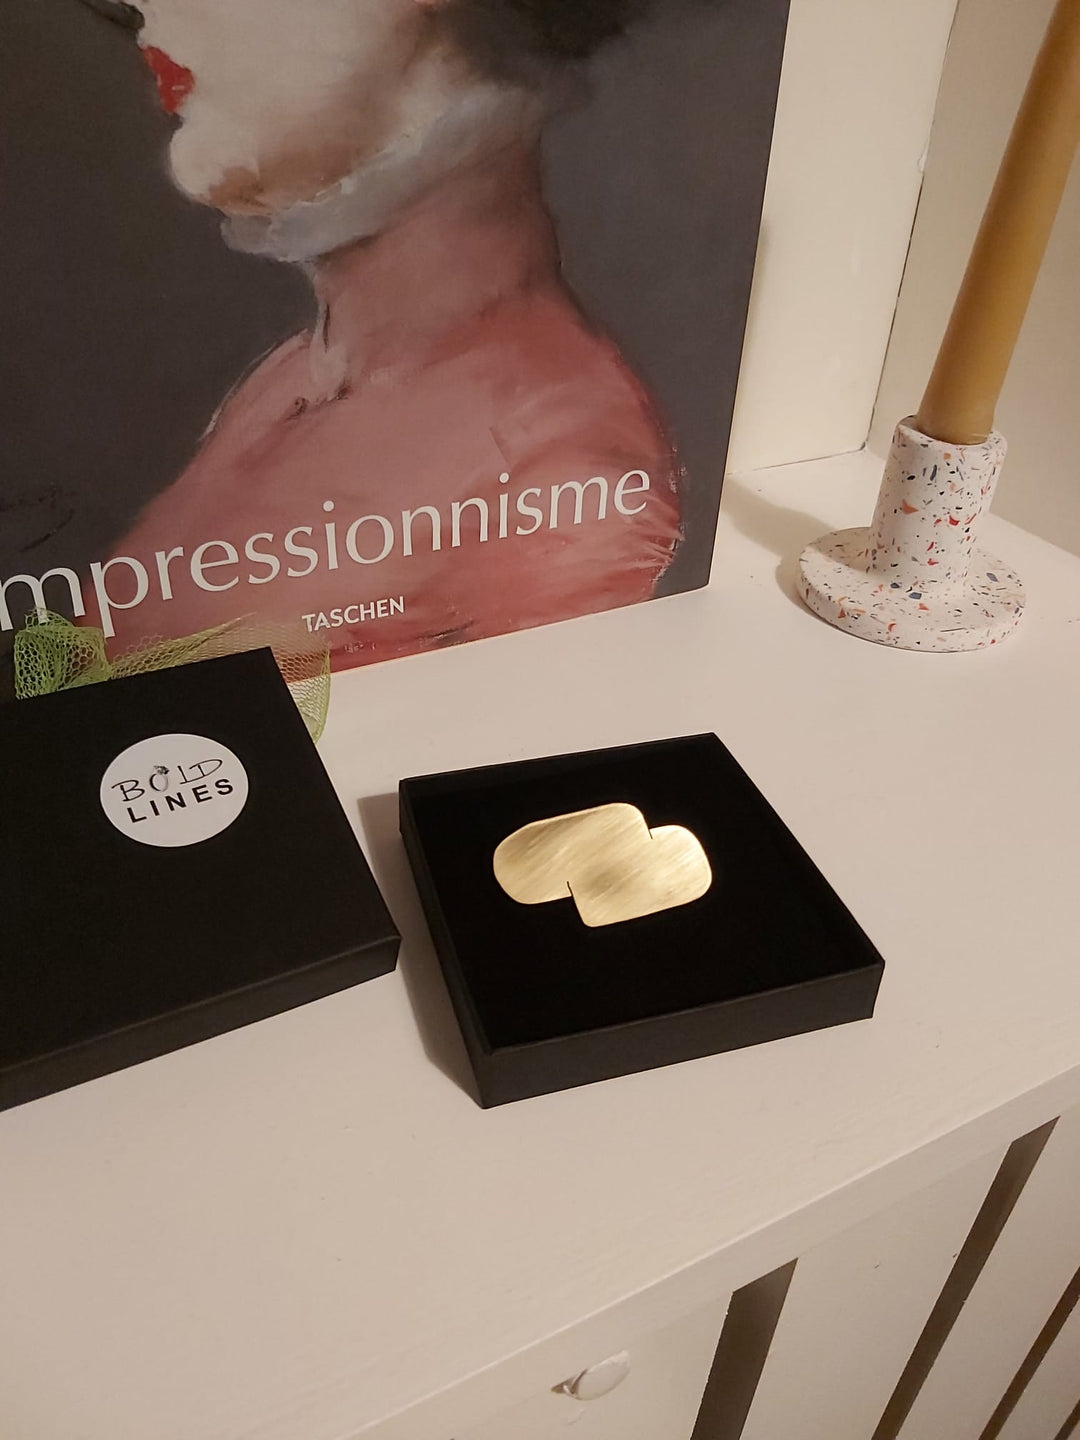 A pair of gold earrings in a black box, with a painting beside them.